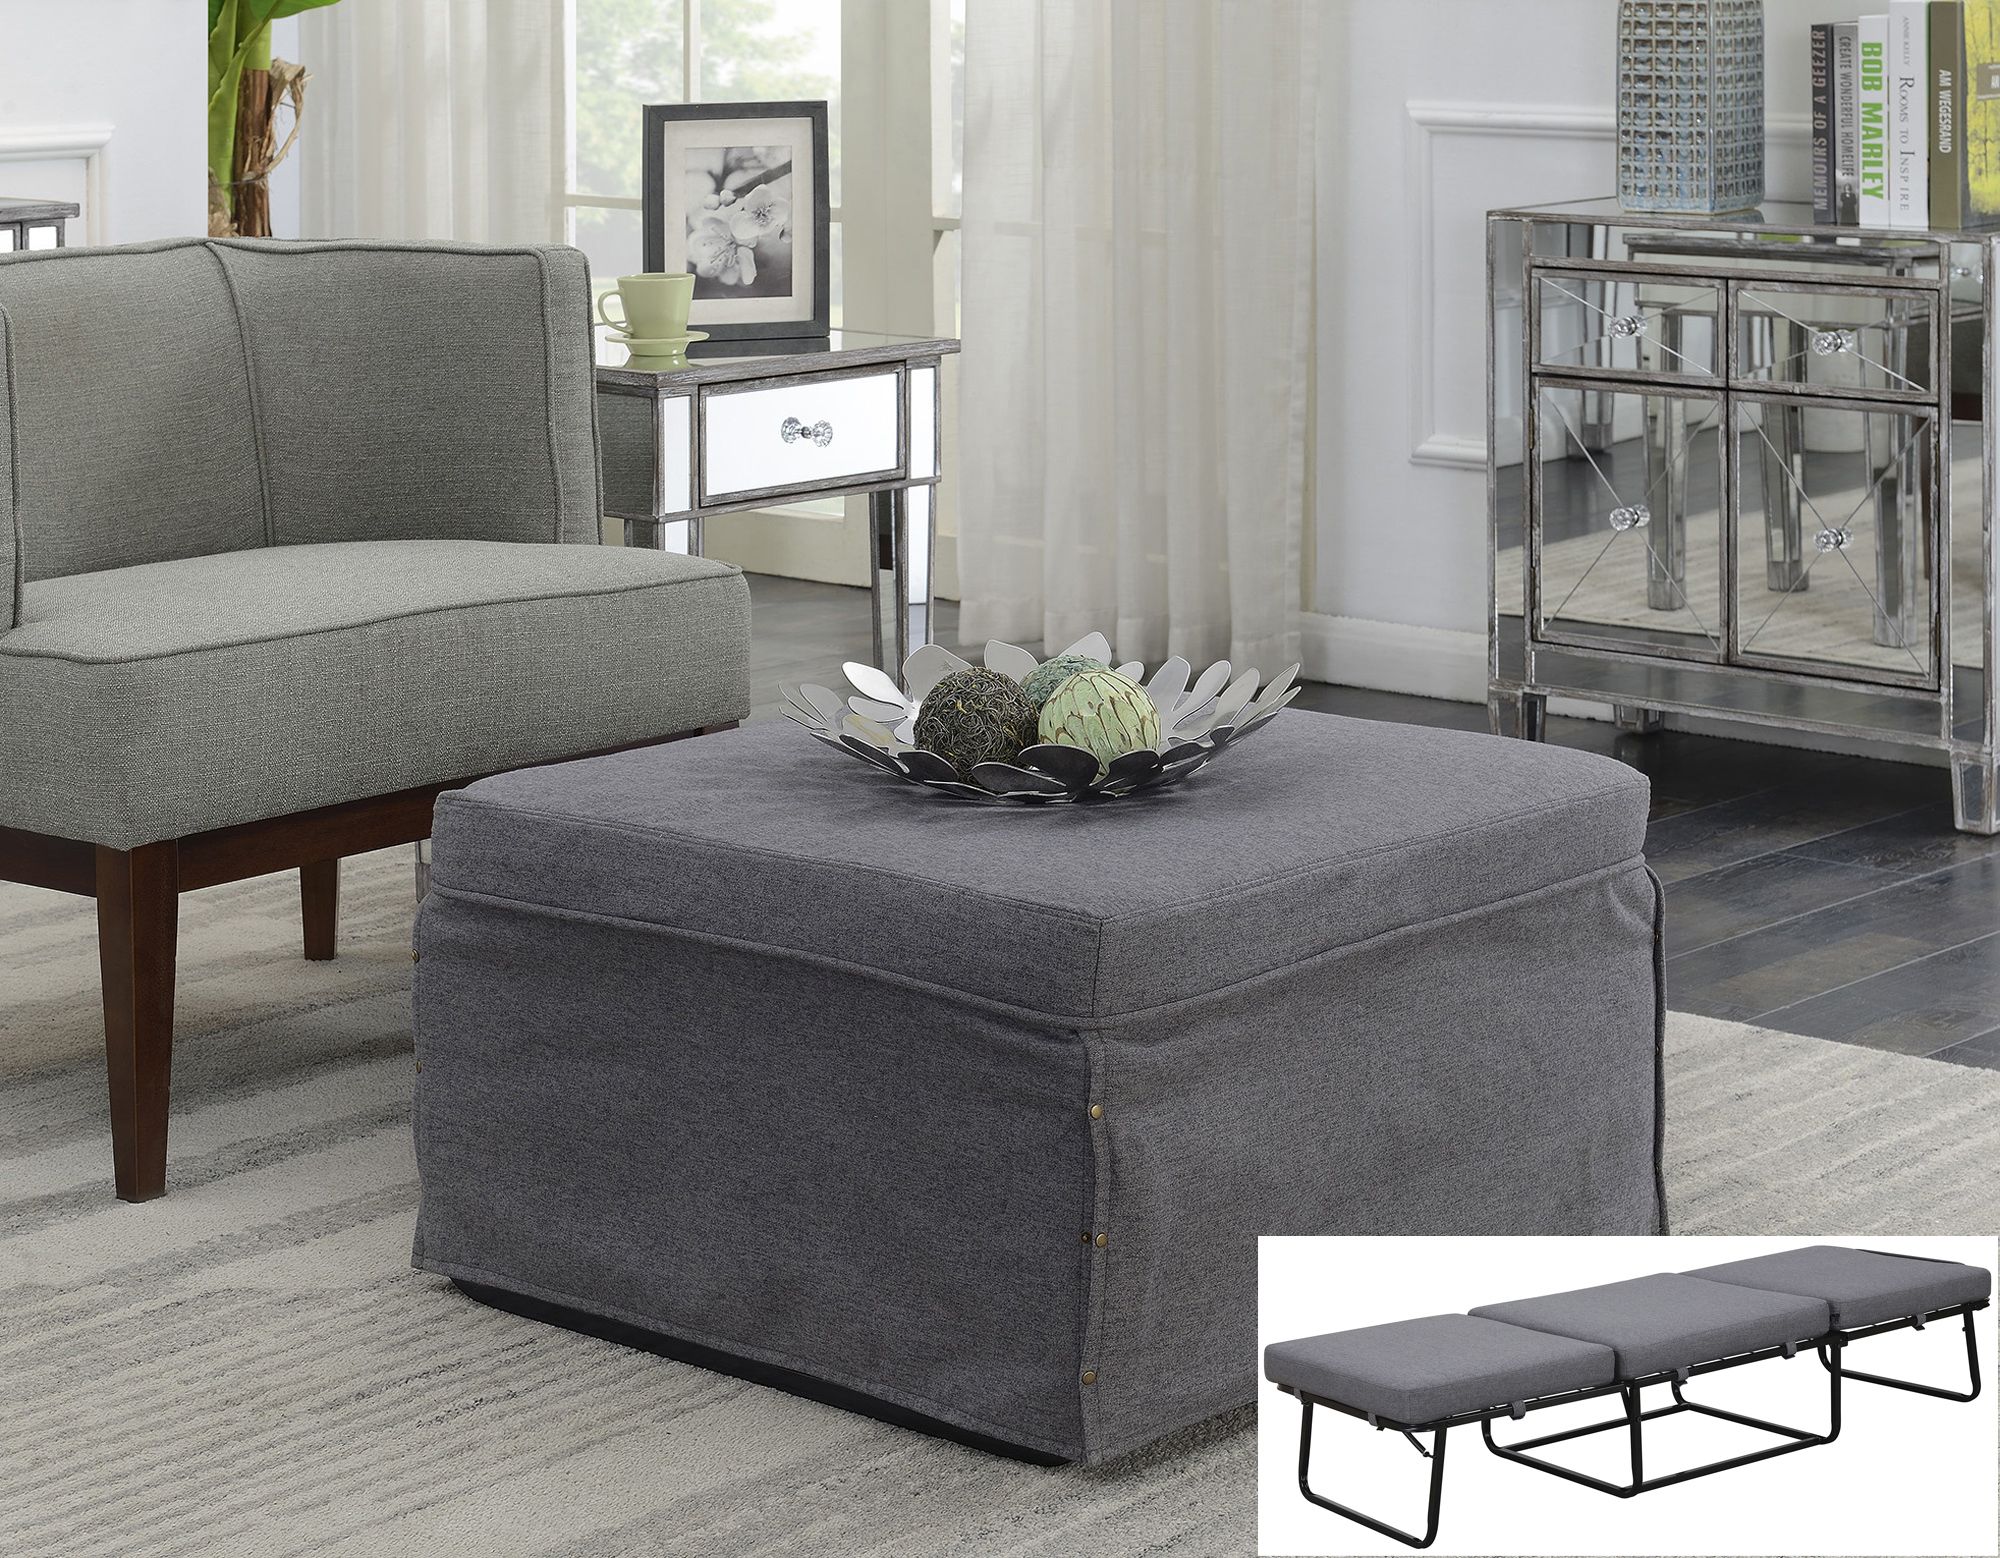 Convenience Concepts Designs4comfort Folding Bed Ottoman, Grey Throughout Light Gray Fold Out Sleeper Ottomans (View 17 of 20)